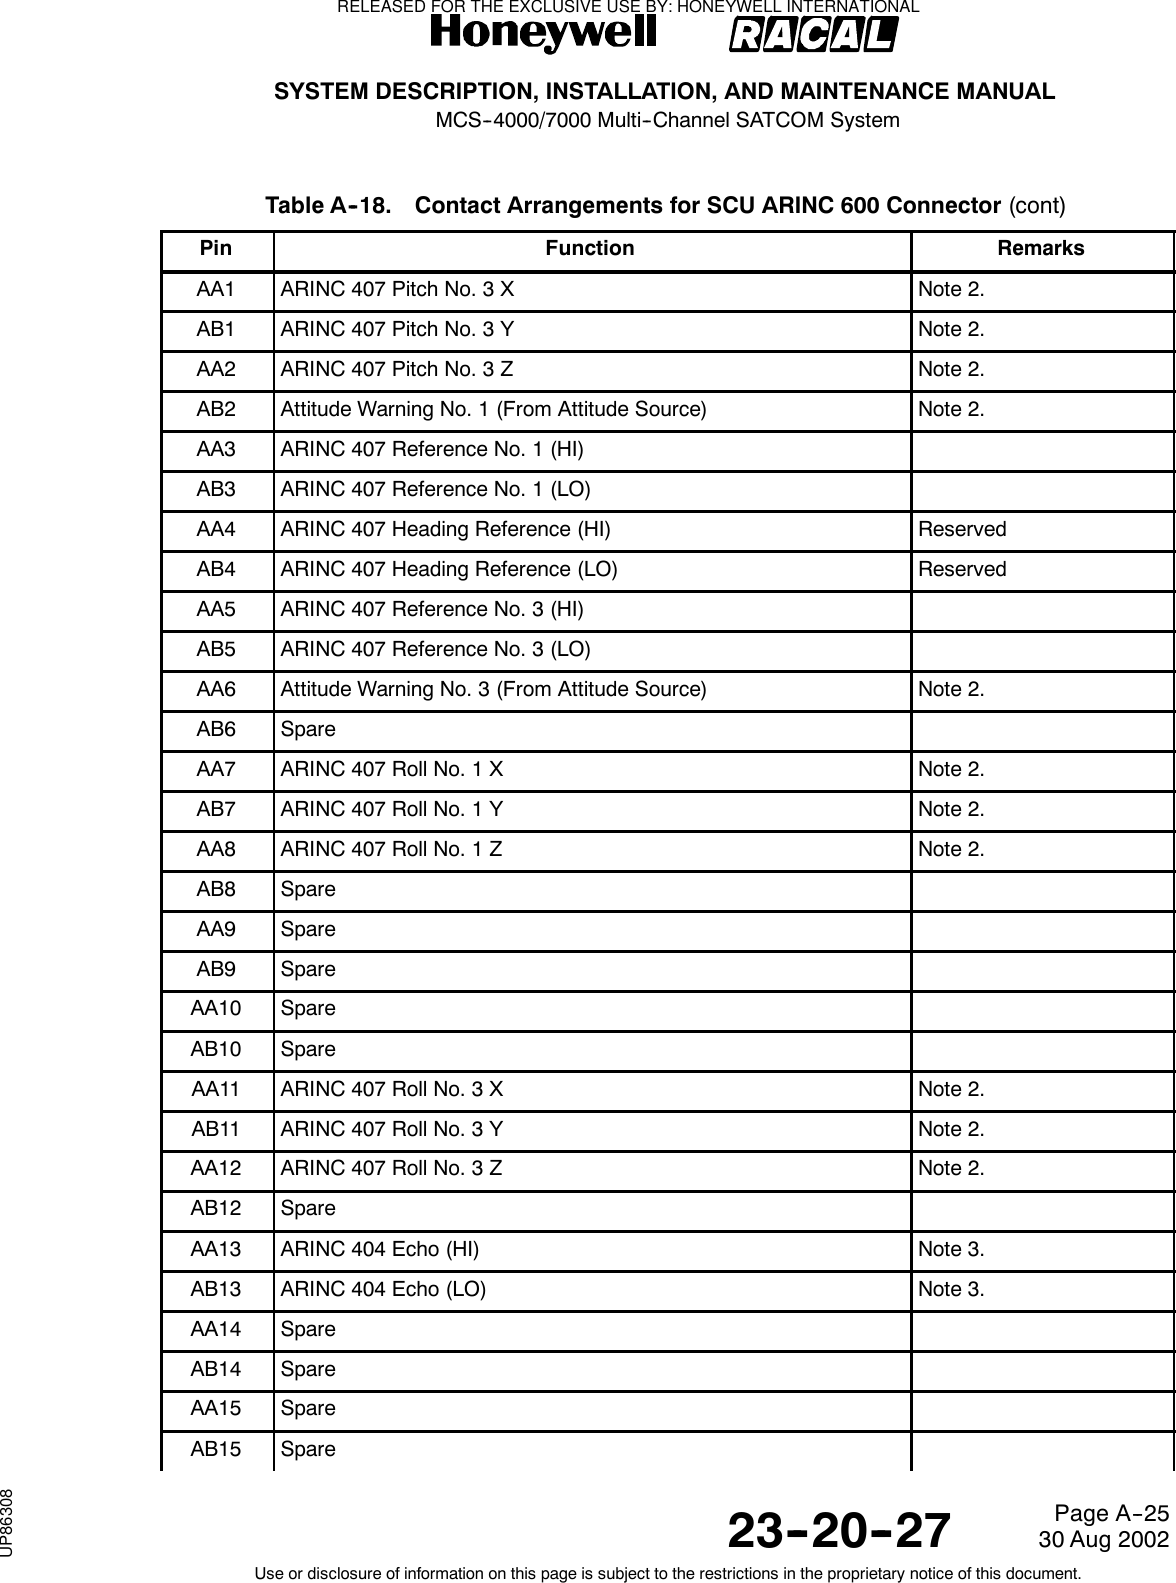 SYSTEM DESCRIPTION, INSTALLATION, AND MAINTENANCE MANUALMCS--4000/7000 Multi--Channel SATCOM System23--20--2730 Aug 2002Use or disclosure of information on this page is subject to the restrictions in the proprietary notice of this document.Page A--25Table A--18. Contact Arrangements for SCU ARINC 600 Connector (cont)Pin RemarksFunctionAA1 ARINC 407 Pitch No. 3 X Note 2.AB1 ARINC 407 Pitch No. 3 Y Note 2.AA2 ARINC 407 Pitch No. 3 Z Note 2.AB2 Attitude Warning No. 1 (From Attitude Source) Note 2.AA3 ARINC 407 Reference No. 1 (HI)AB3 ARINC 407 Reference No. 1 (LO)AA4 ARINC 407 Heading Reference (HI) ReservedAB4 ARINC 407 Heading Reference (LO) ReservedAA5 ARINC 407 Reference No. 3 (HI)AB5 ARINC 407 Reference No. 3 (LO)AA6 Attitude Warning No. 3 (From Attitude Source) Note 2.AB6 SpareAA7 ARINC 407 Roll No. 1 X Note 2.AB7 ARINC 407 Roll No. 1 Y Note 2.AA8 ARINC 407 Roll No. 1 Z Note 2.AB8 SpareAA9 SpareAB9 SpareAA10 SpareAB10 SpareAA11 ARINC 407 Roll No. 3 X Note 2.AB11 ARINC 407 Roll No. 3 Y Note 2.AA12 ARINC 407 Roll No. 3 Z Note 2.AB12 SpareAA13 ARINC 404 Echo (HI) Note 3.AB13 ARINC 404 Echo (LO) Note 3.AA14 SpareAB14 SpareAA15 SpareAB15 SpareRELEASED FOR THE EXCLUSIVE USE BY: HONEYWELL INTERNATIONALUP86308